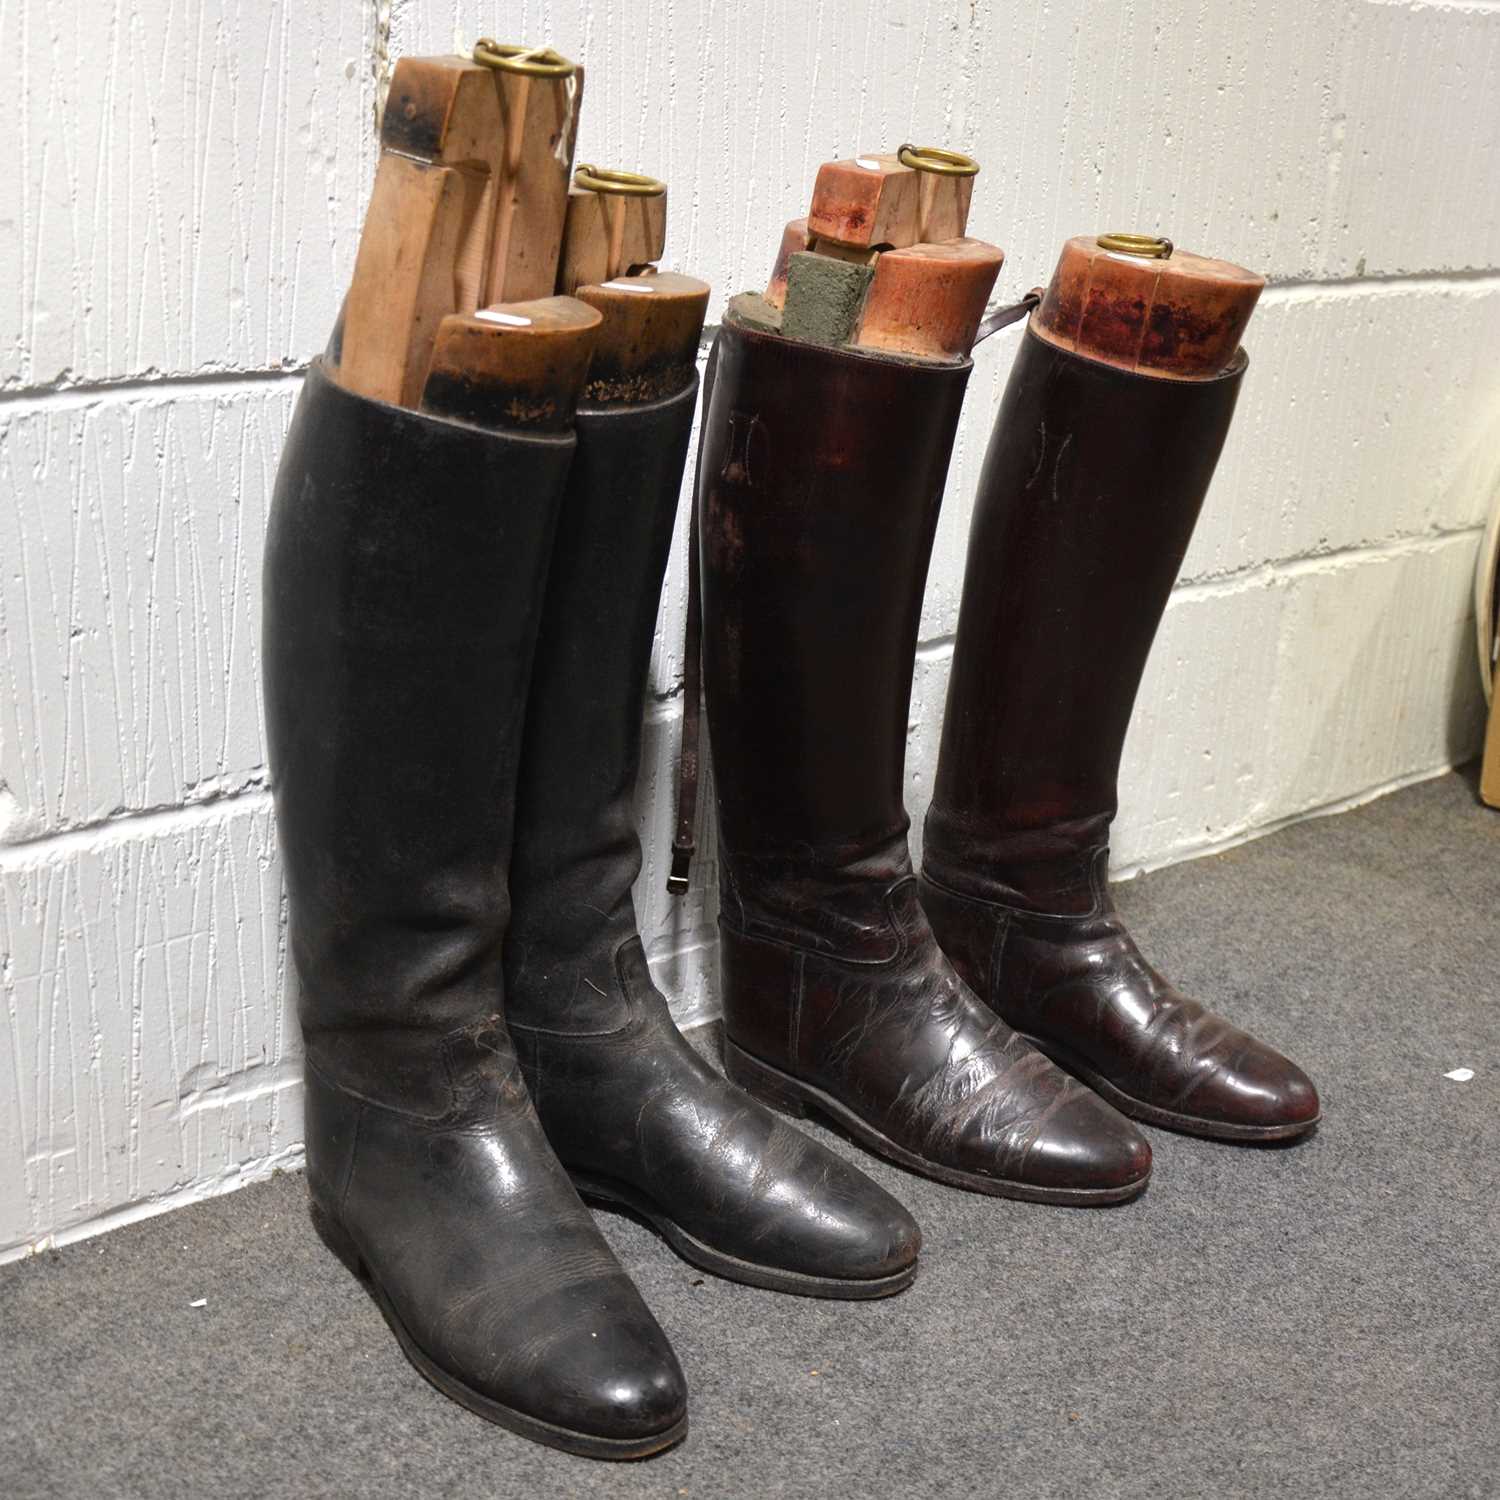 Lot 259 - Two pairs of leather riding boots with wooden trees